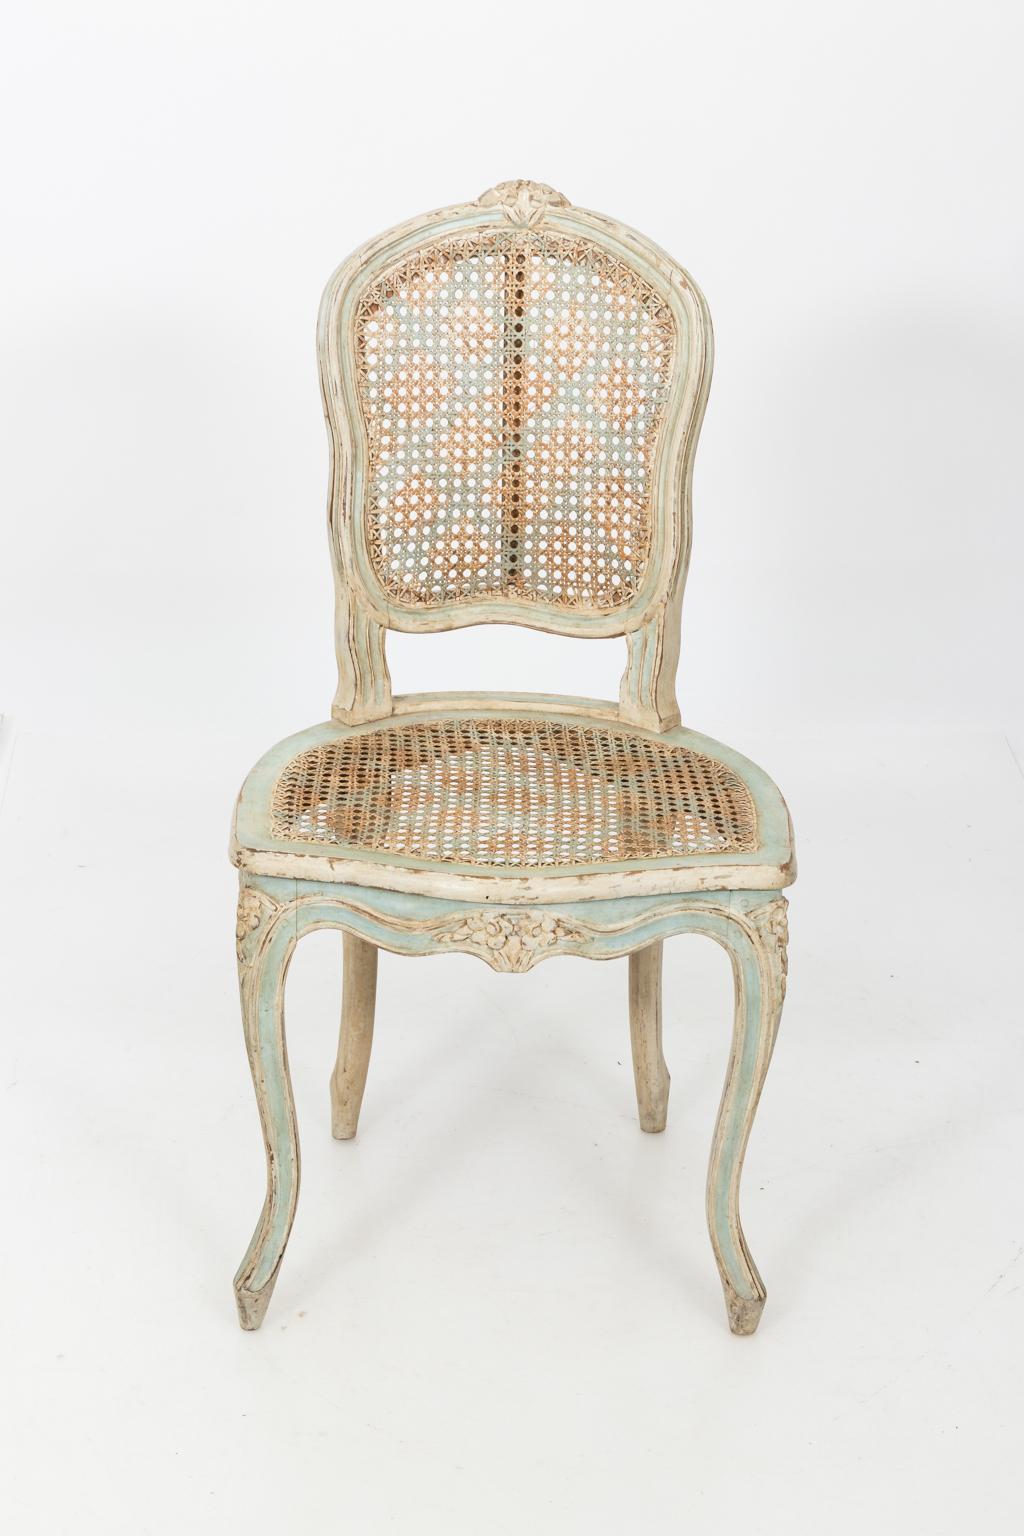 Pair of painted Louis XV style woven cane back side chairs with blue lattice stencil work, circa 20th century. The chairs also feature carved flowers on the seat rail and cabriole legs. Made in England.
 